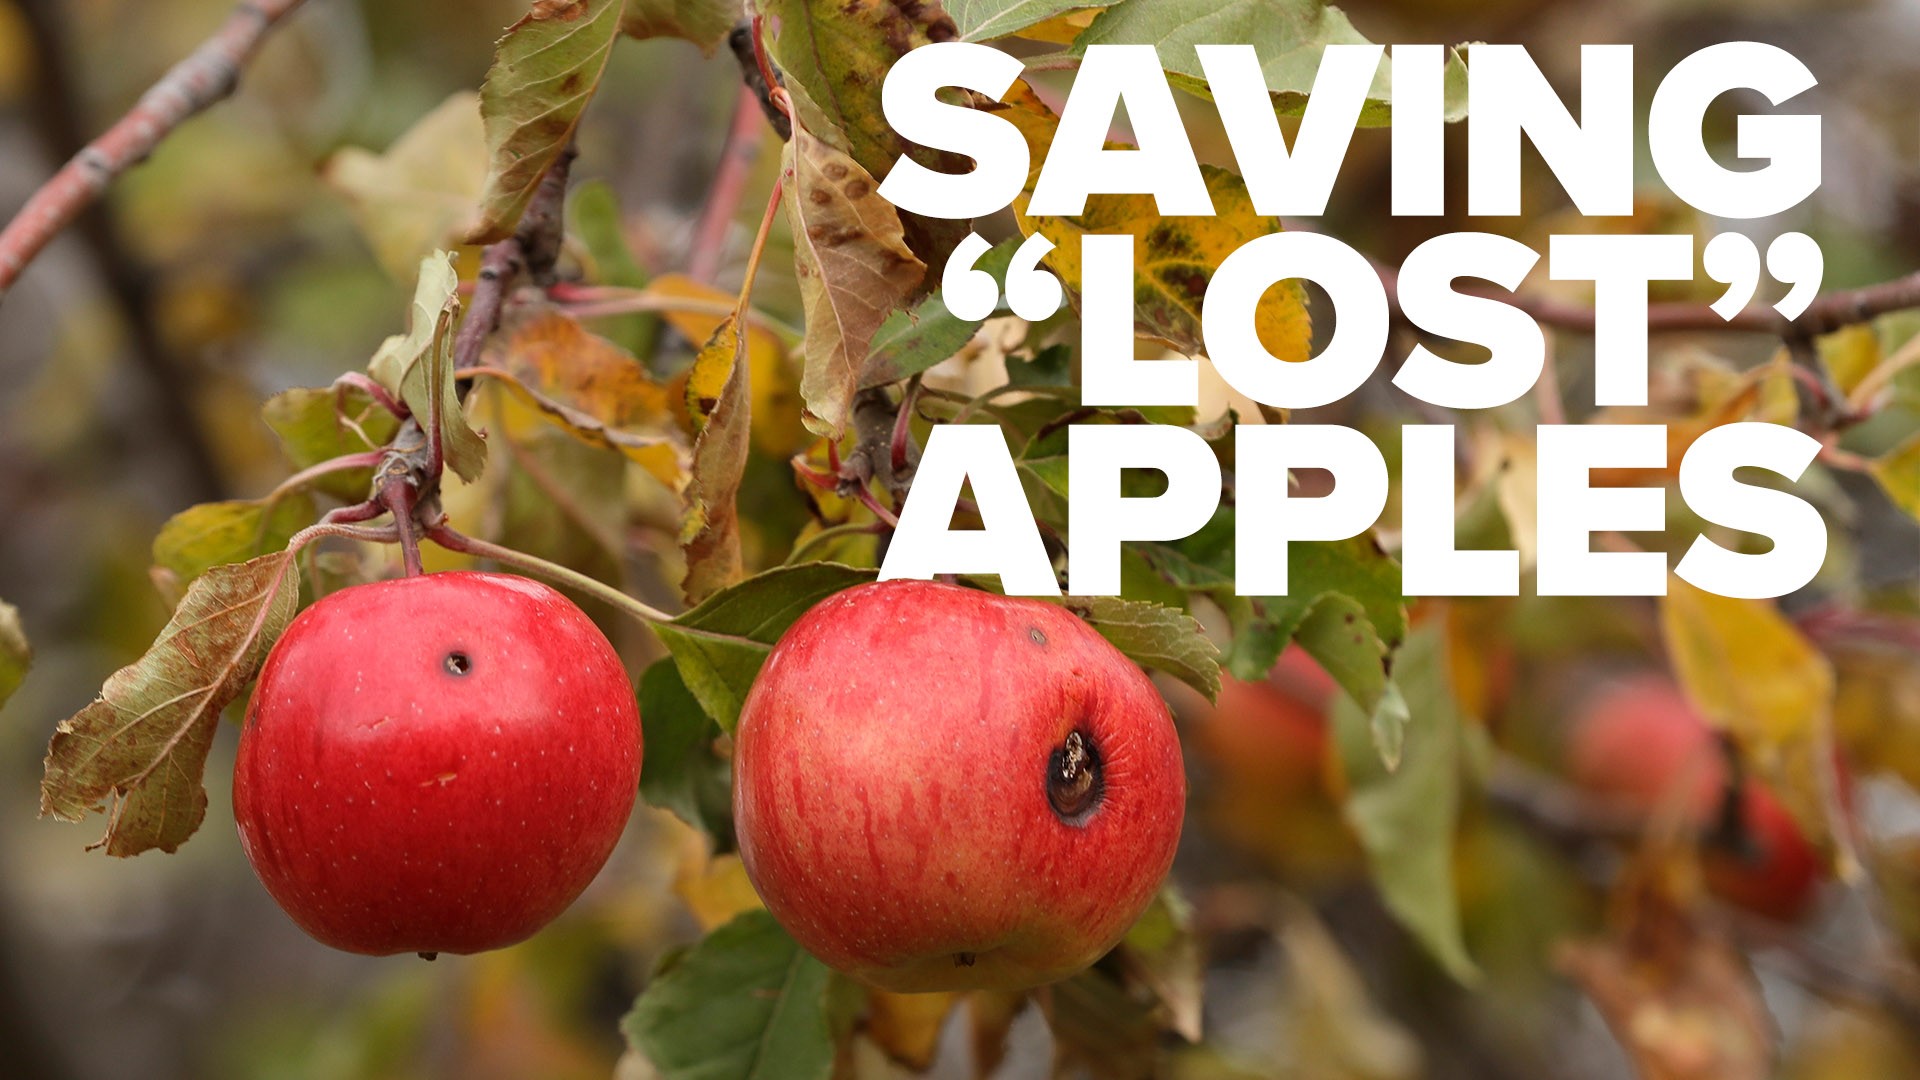 Two retirees are saving long-lost apple varieties from going extinct.